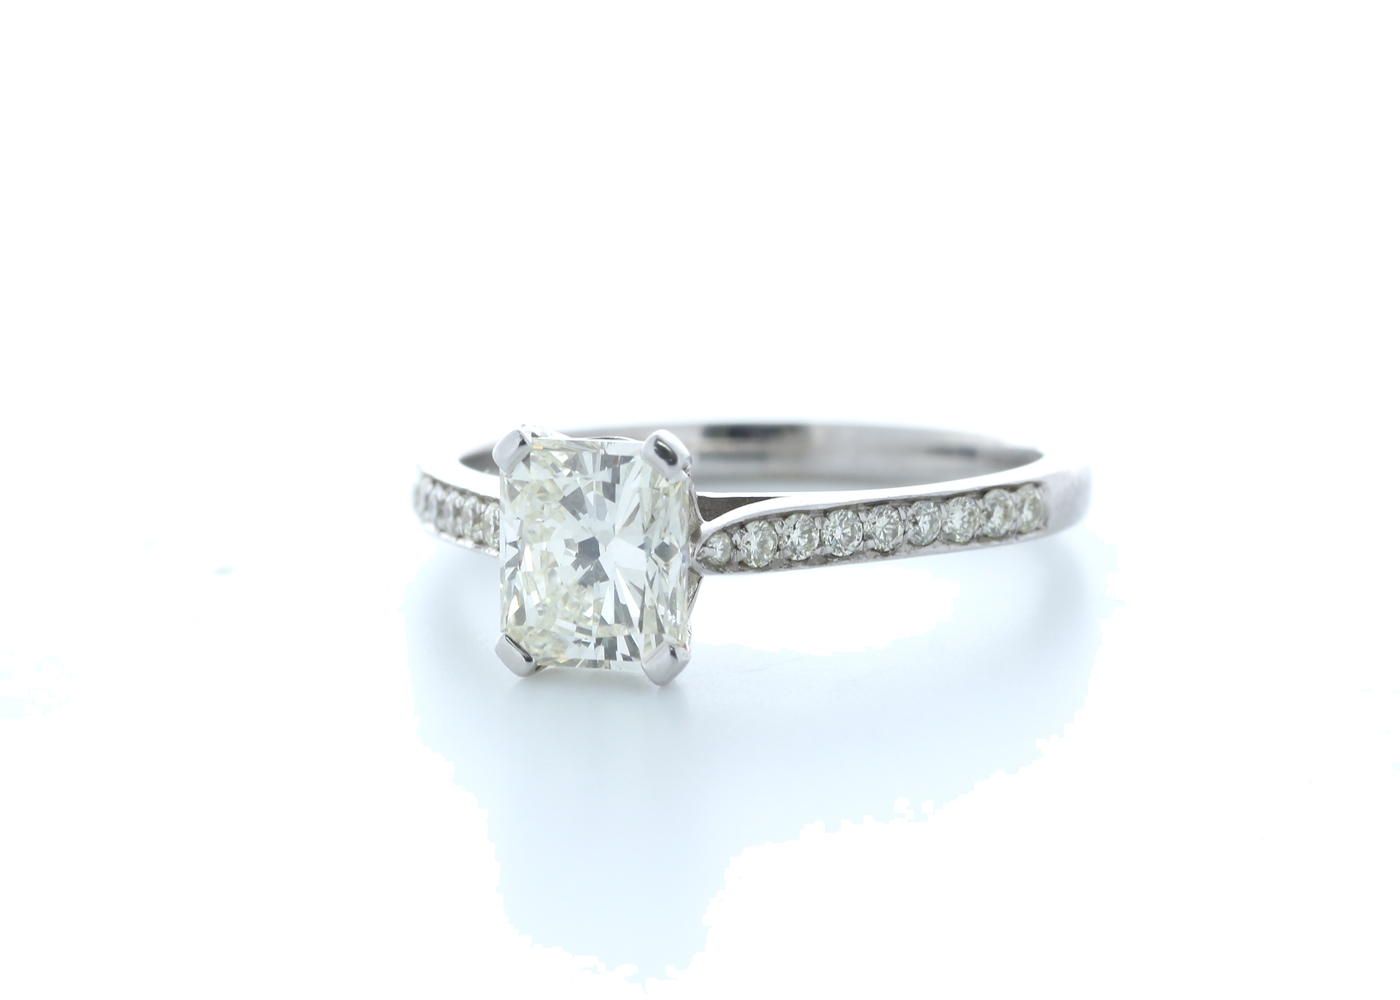 18ct White Gold Radiant Cut Diamond Ring 1.36 (1.19) Carats - Image 2 of 5